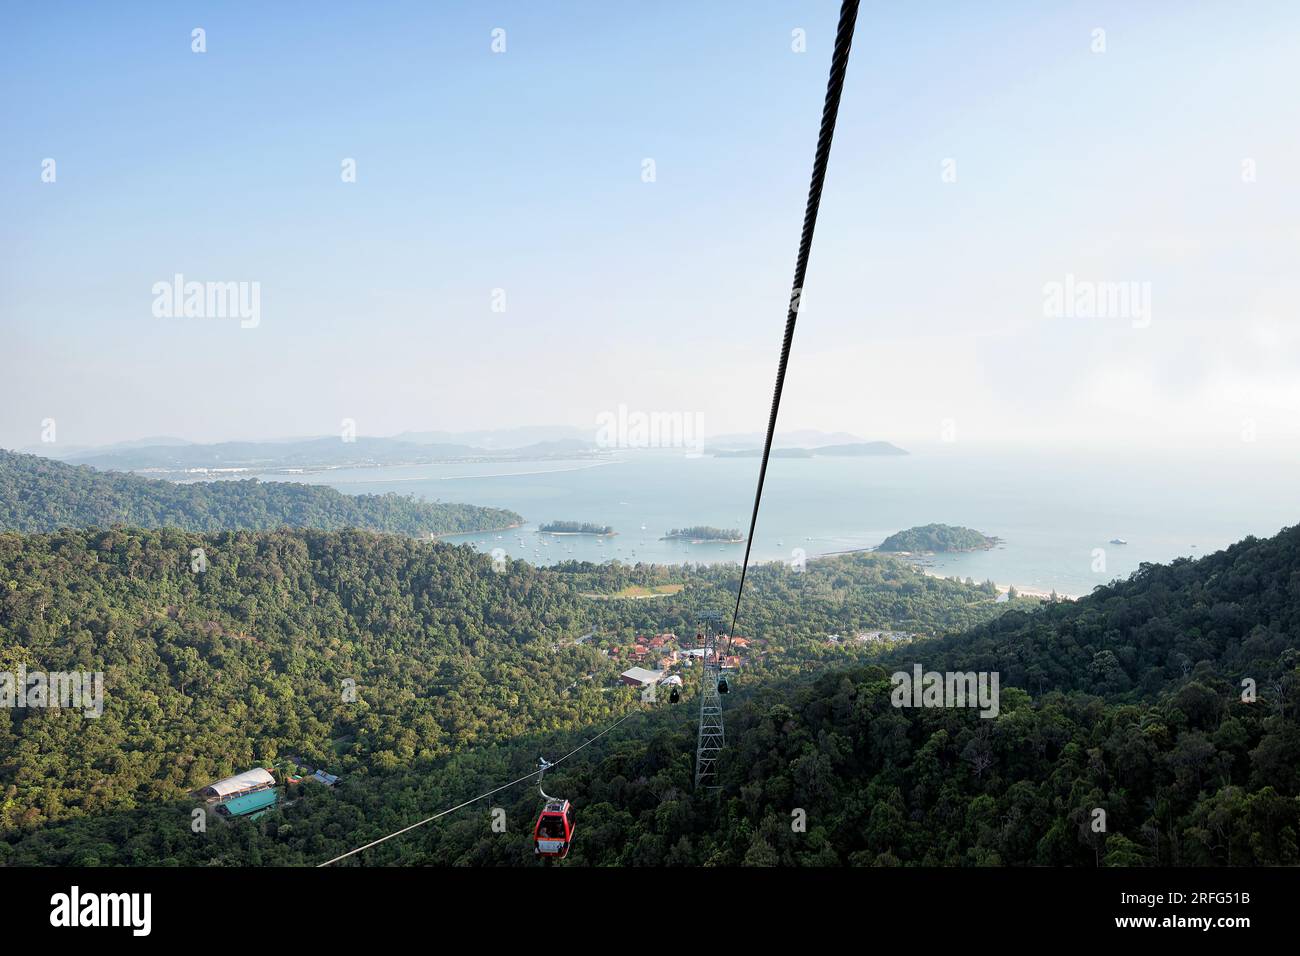 Langkawi Island, Malaysia - Dec 23, 2018: The Langkawi Cable Car, also known as Langkawi SkyCab transporting passengers to top Machincang mountain and Stock Photo